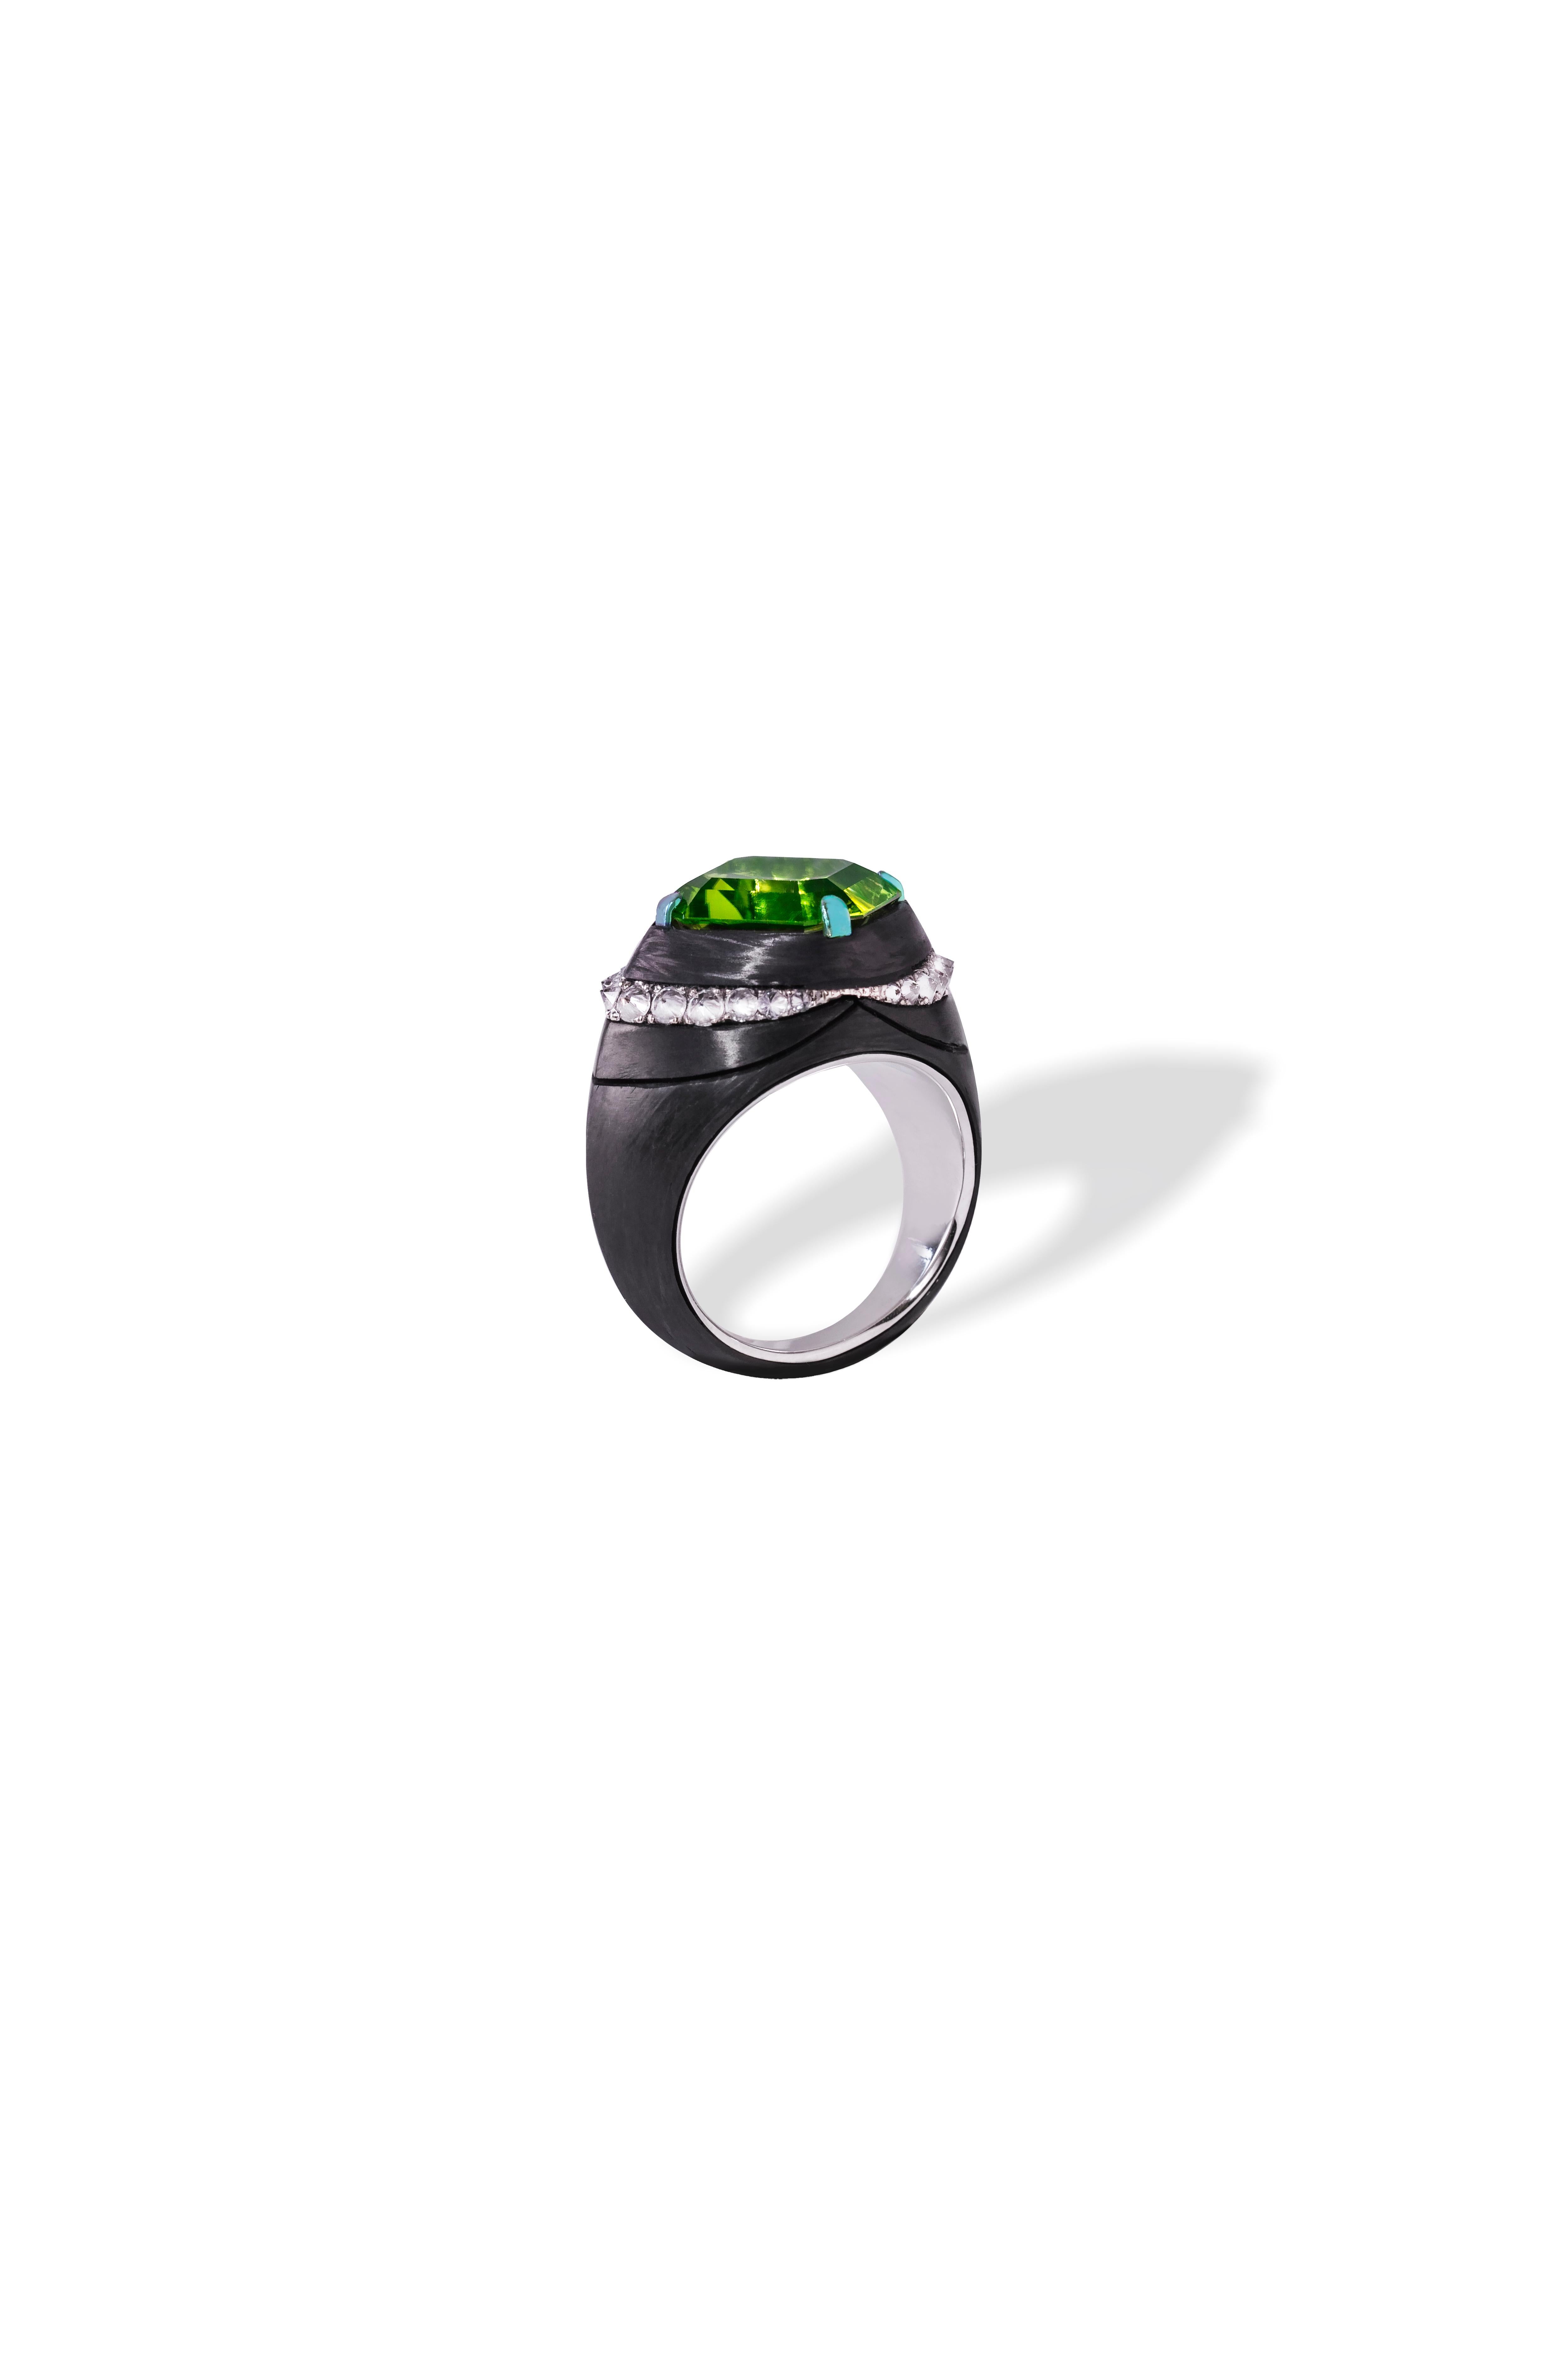 This ring is made to order only. Completely customizable. 
Ring handcrafted in Carbon Fiber,  handset White Diamonds 0,7 ct., 18W gold 8.30 gr., Peridot 7.75 ct. (stone size 12x12x7.18mm). 

Gemstones are natural and not treated. 

Intricate work in